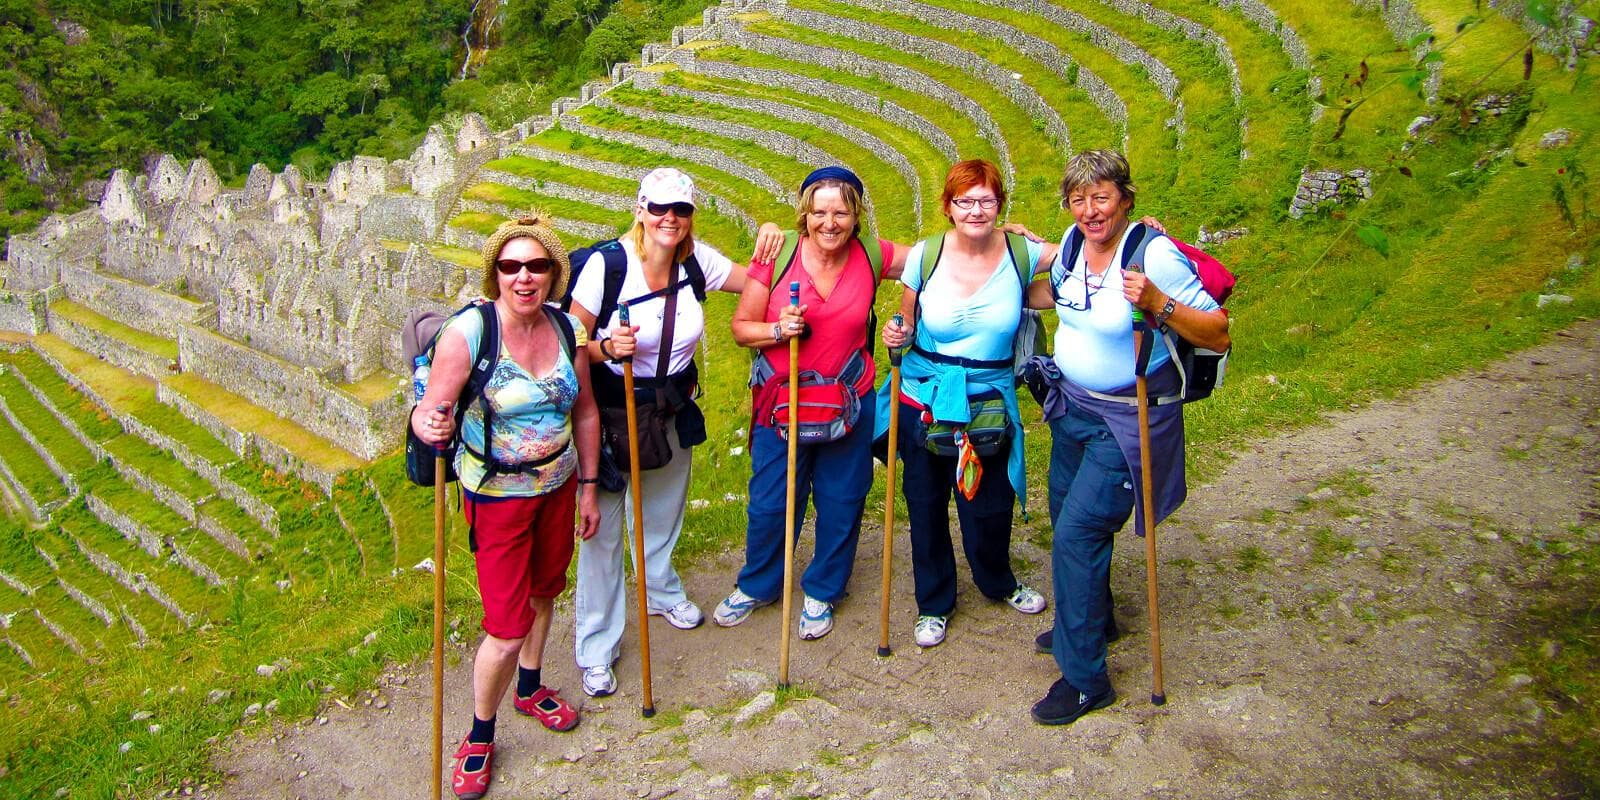 Inca Trail Express to Machu Picchu - Group on the ruins